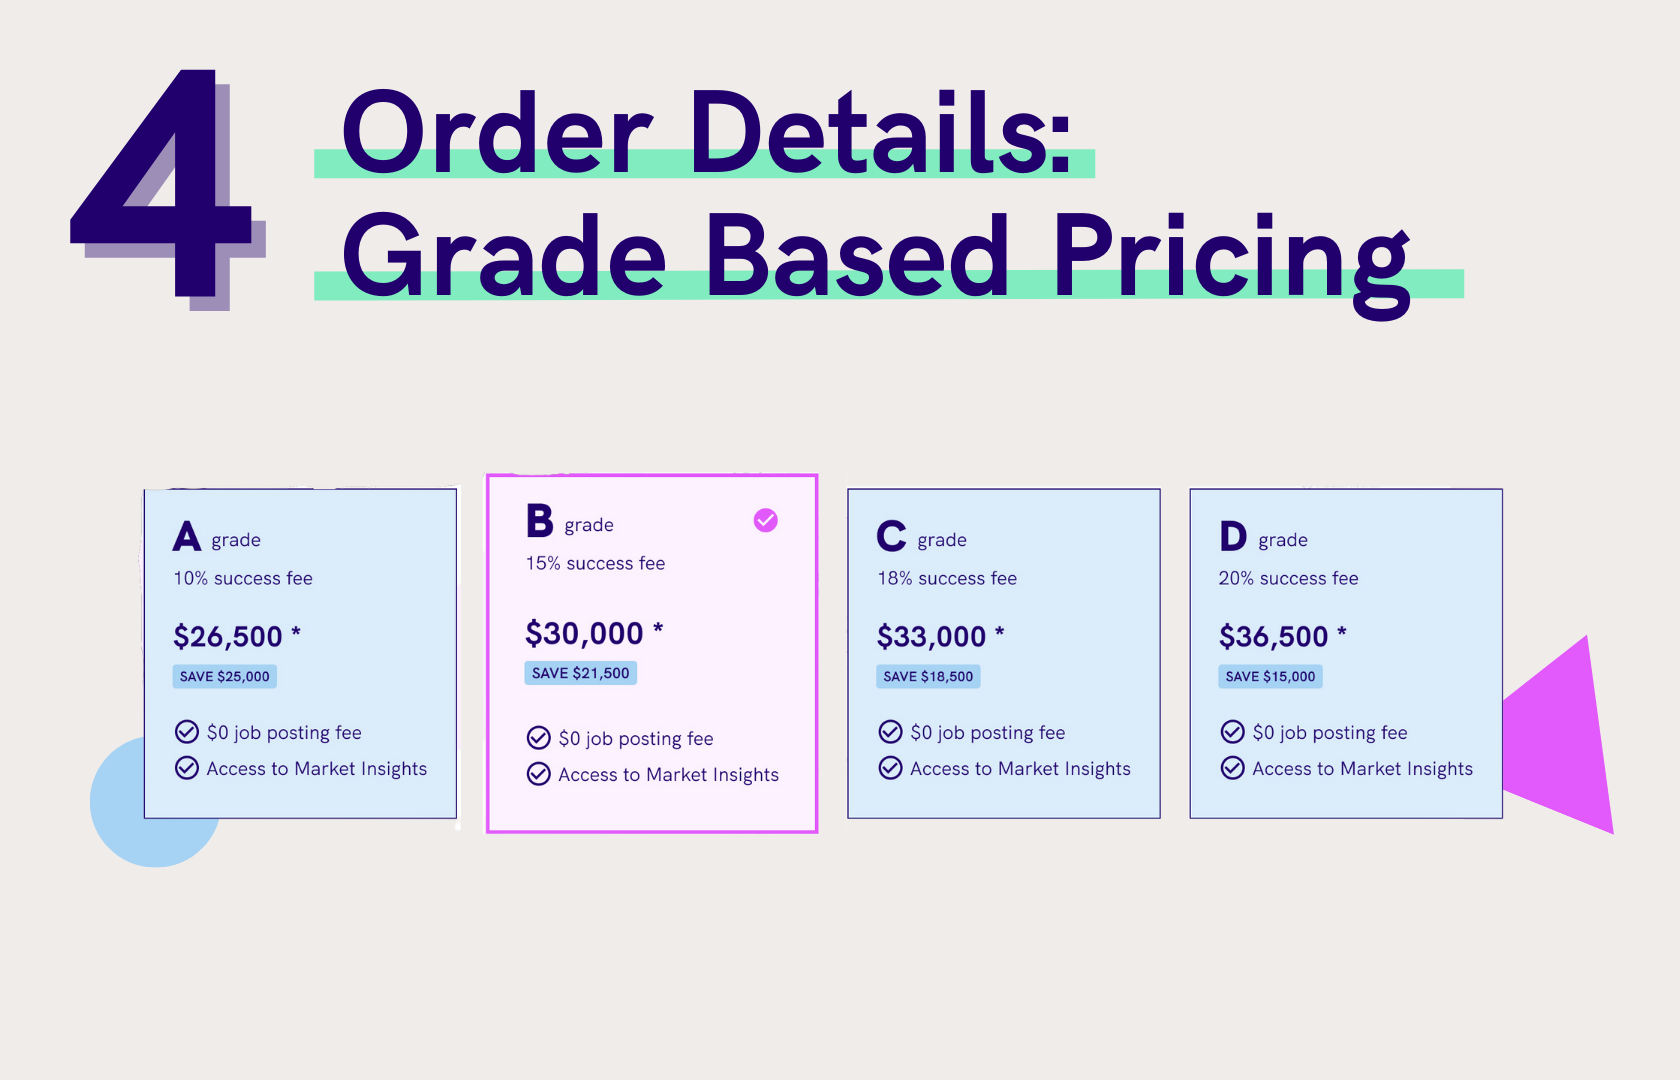 Relode provides grade based pricing for better cost transparency